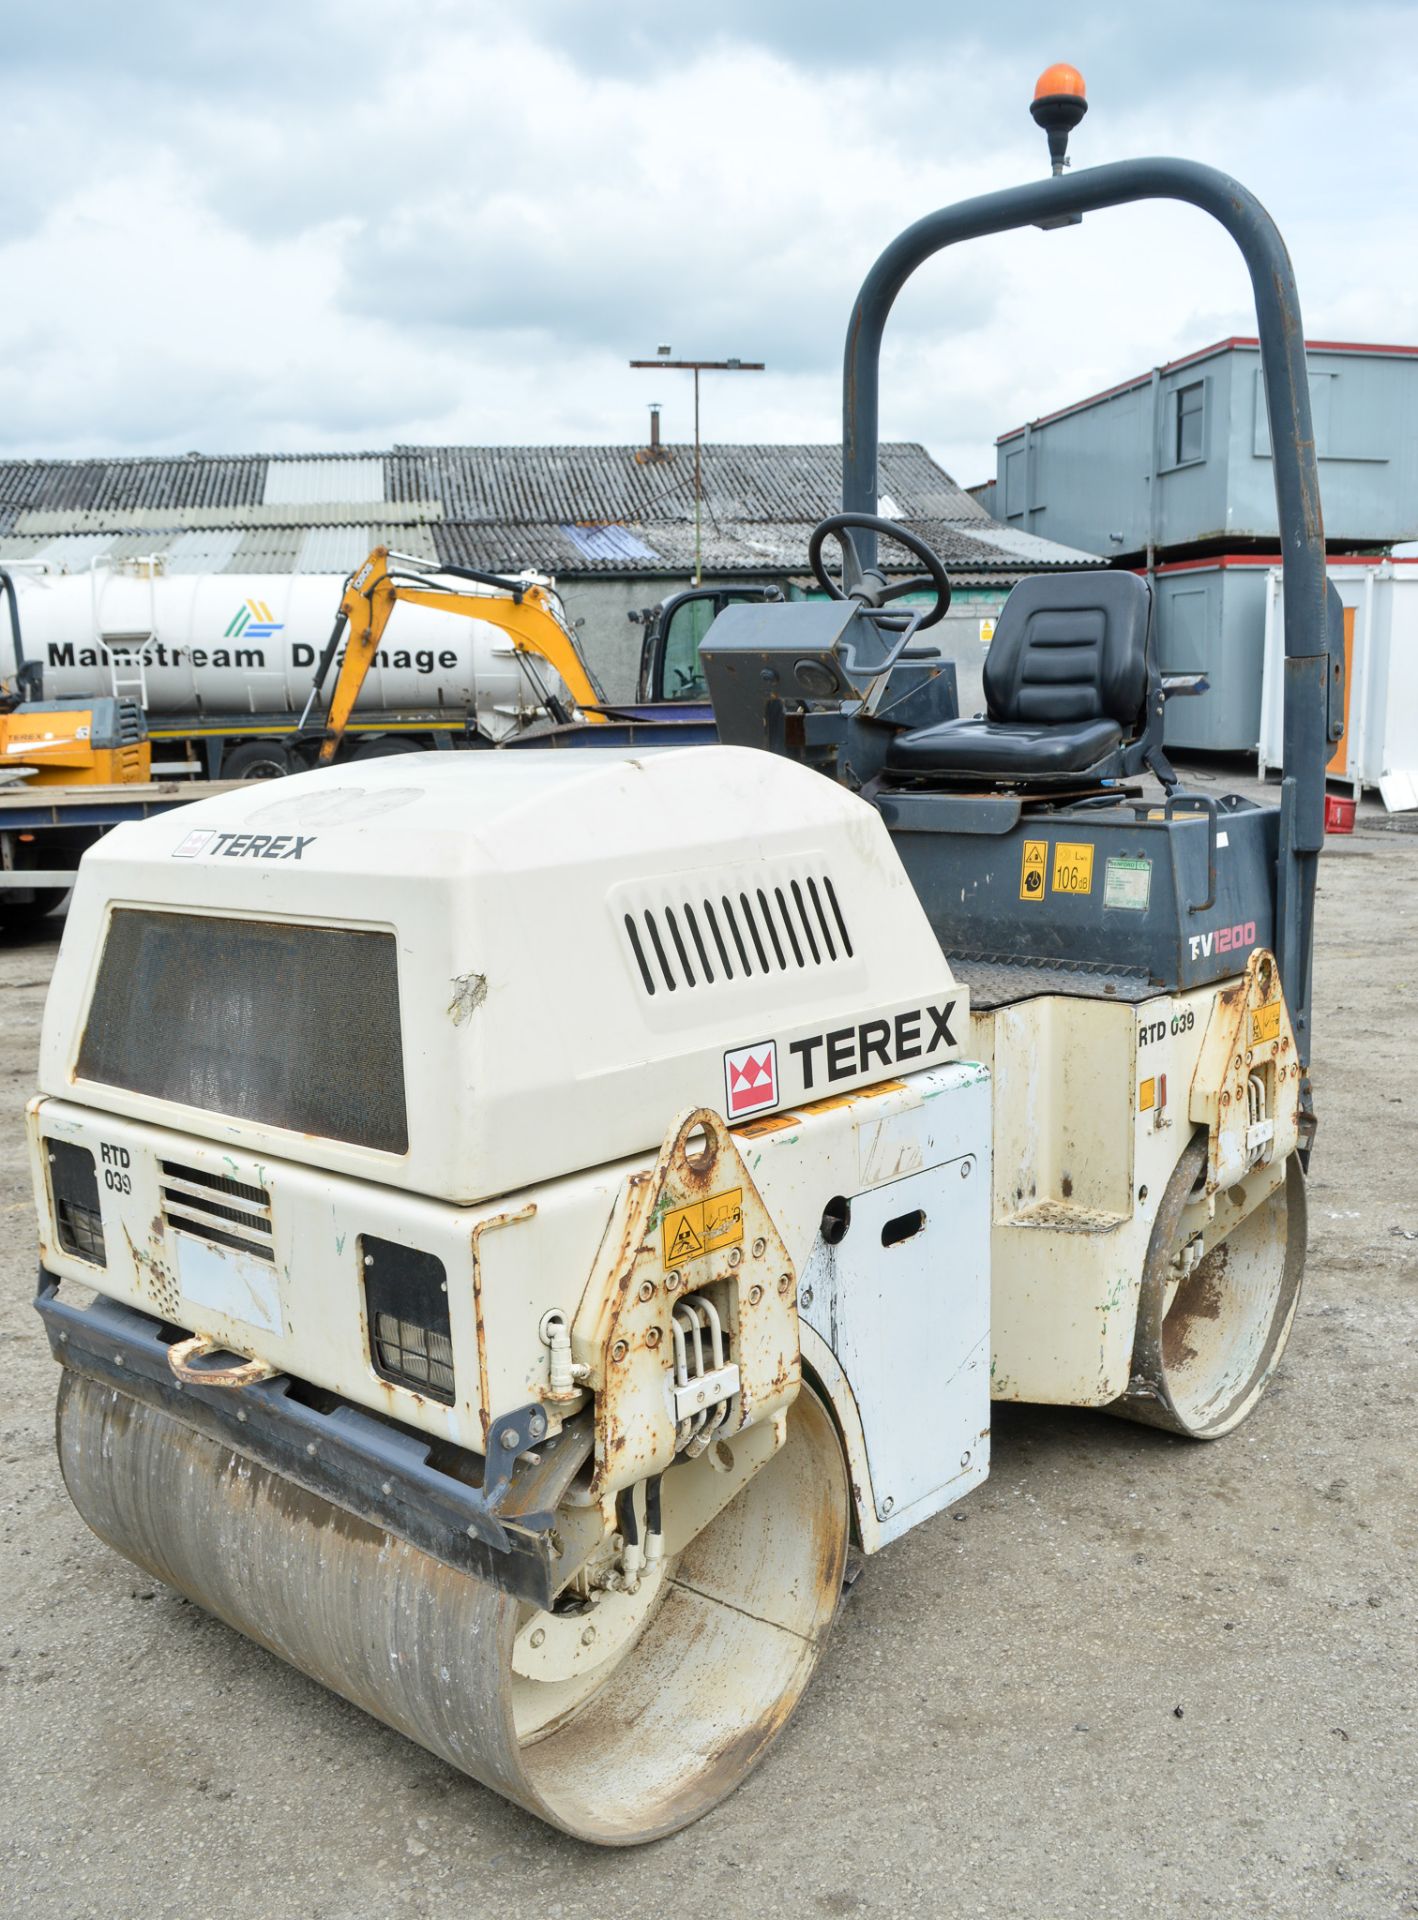 Benford Terex TV1200 double drum ride on roller Year: 2008 S/N: E801CF002 Recorded Hours: 1064